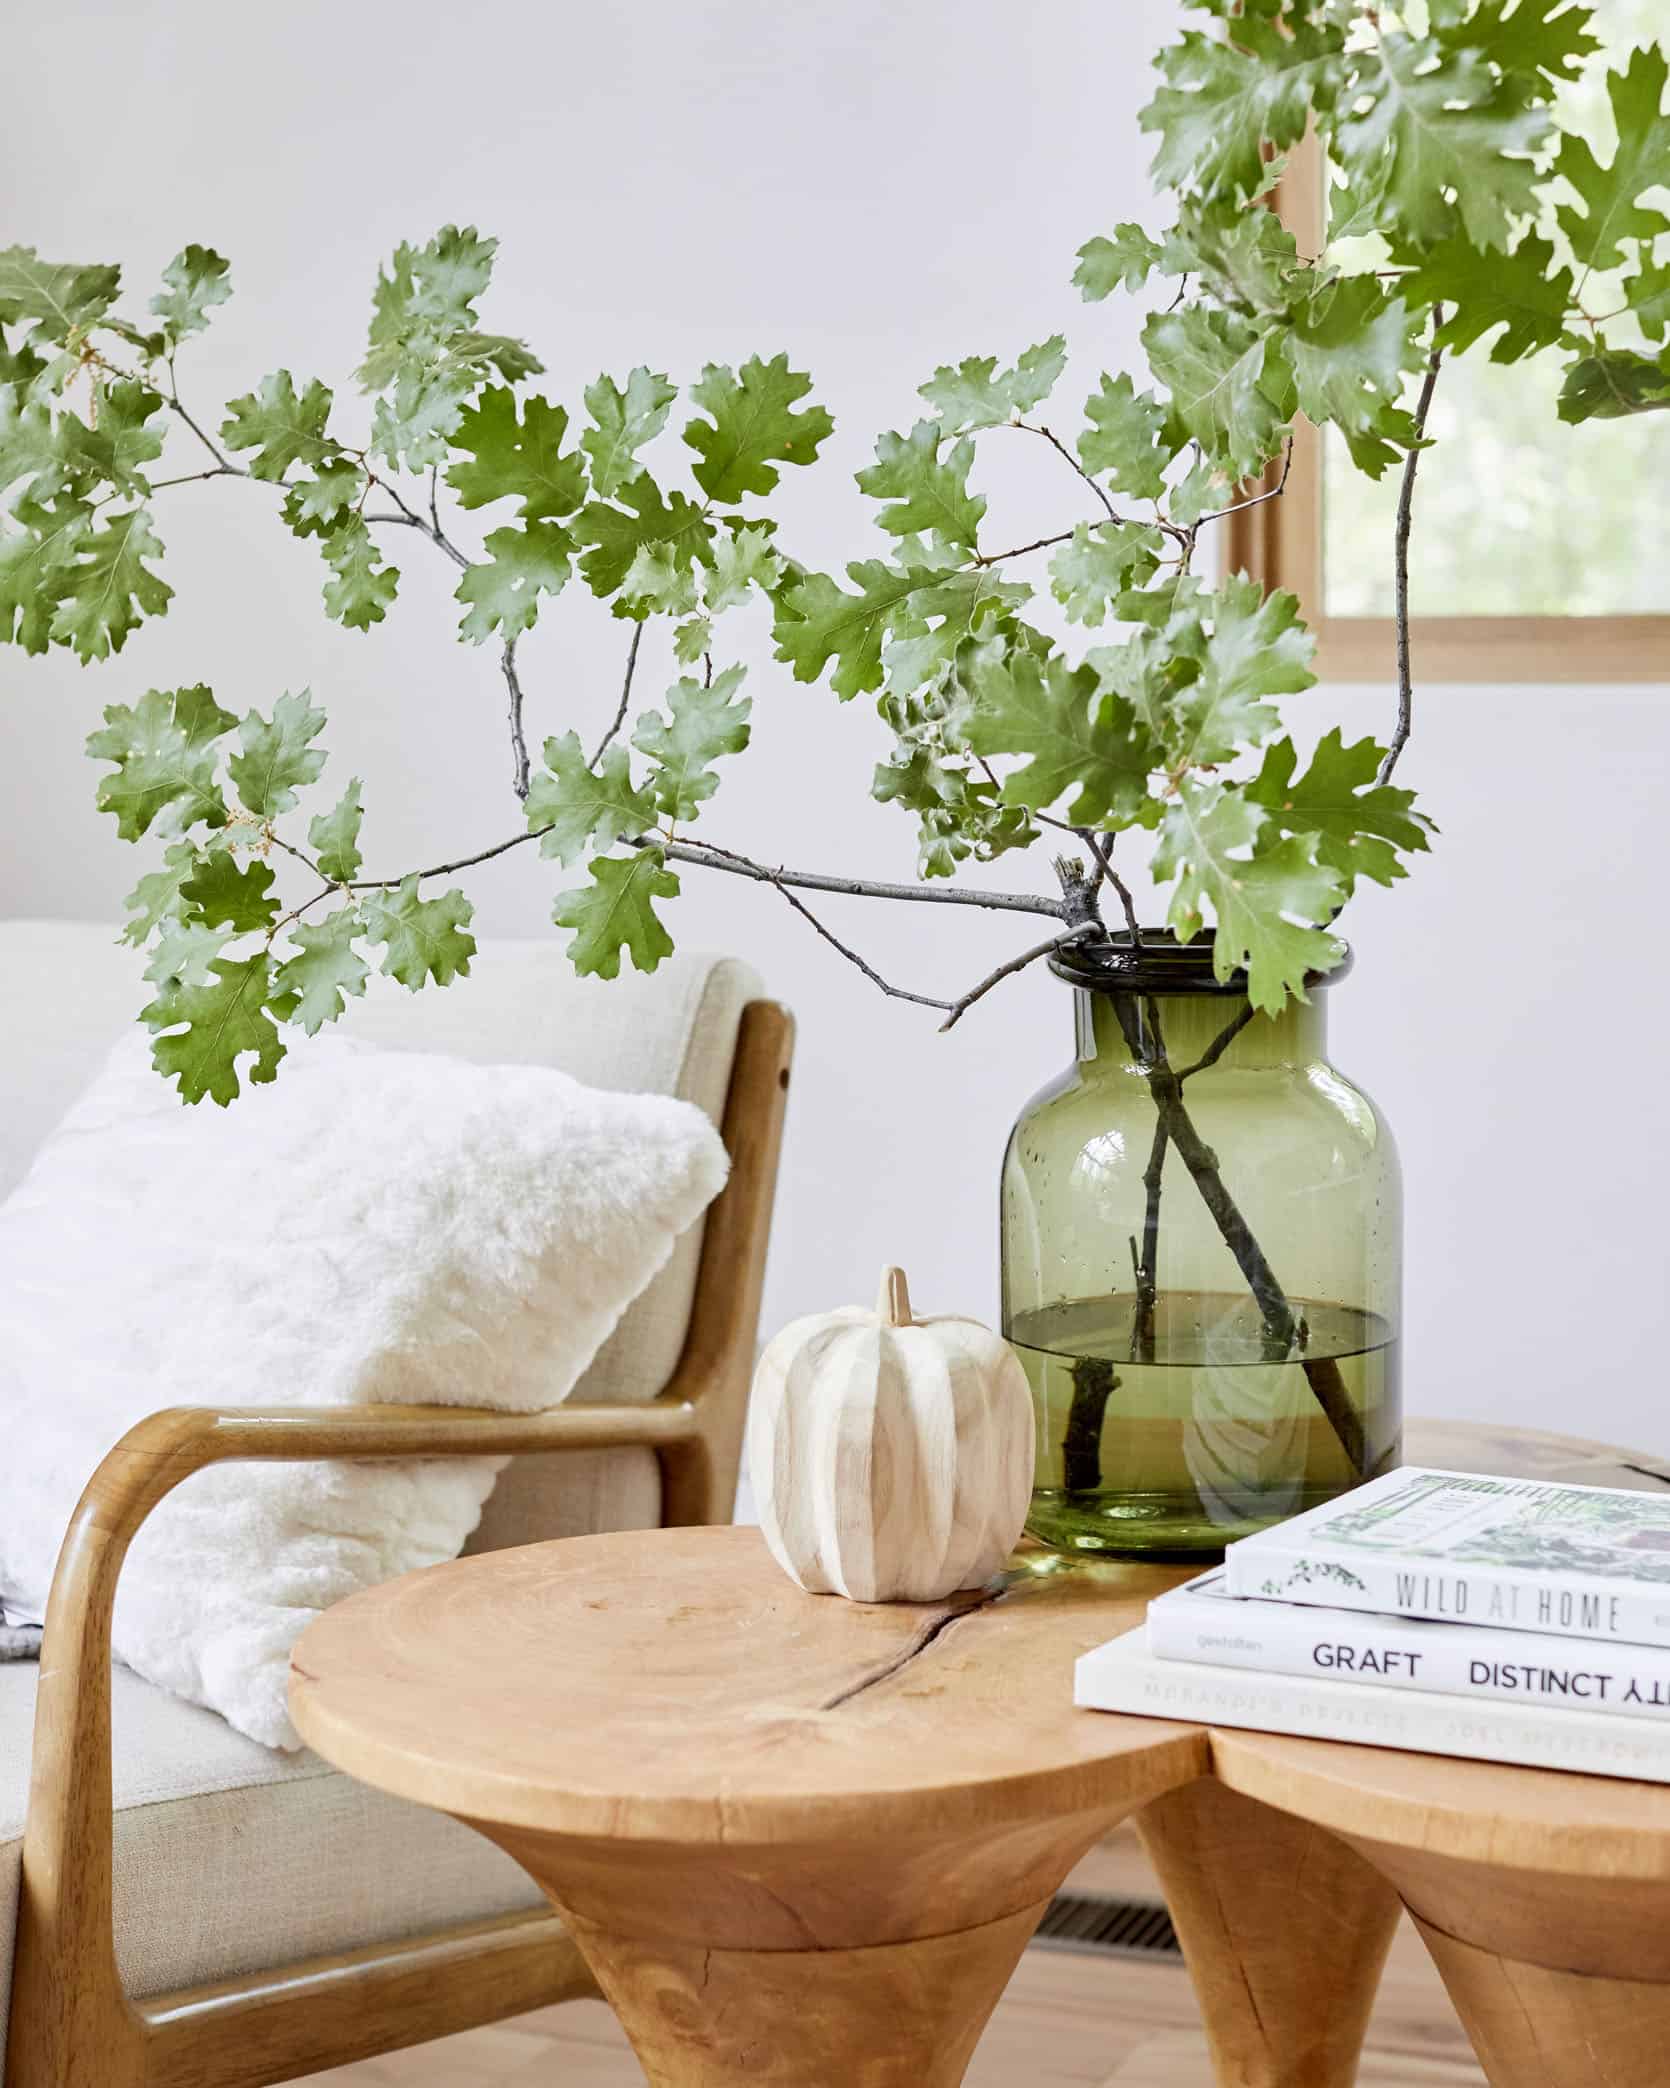 See How Ehd Brings Fall Into Our Homes (And Yes, There Are *Chic* Pumpkins Involved ... Target Does It Again)